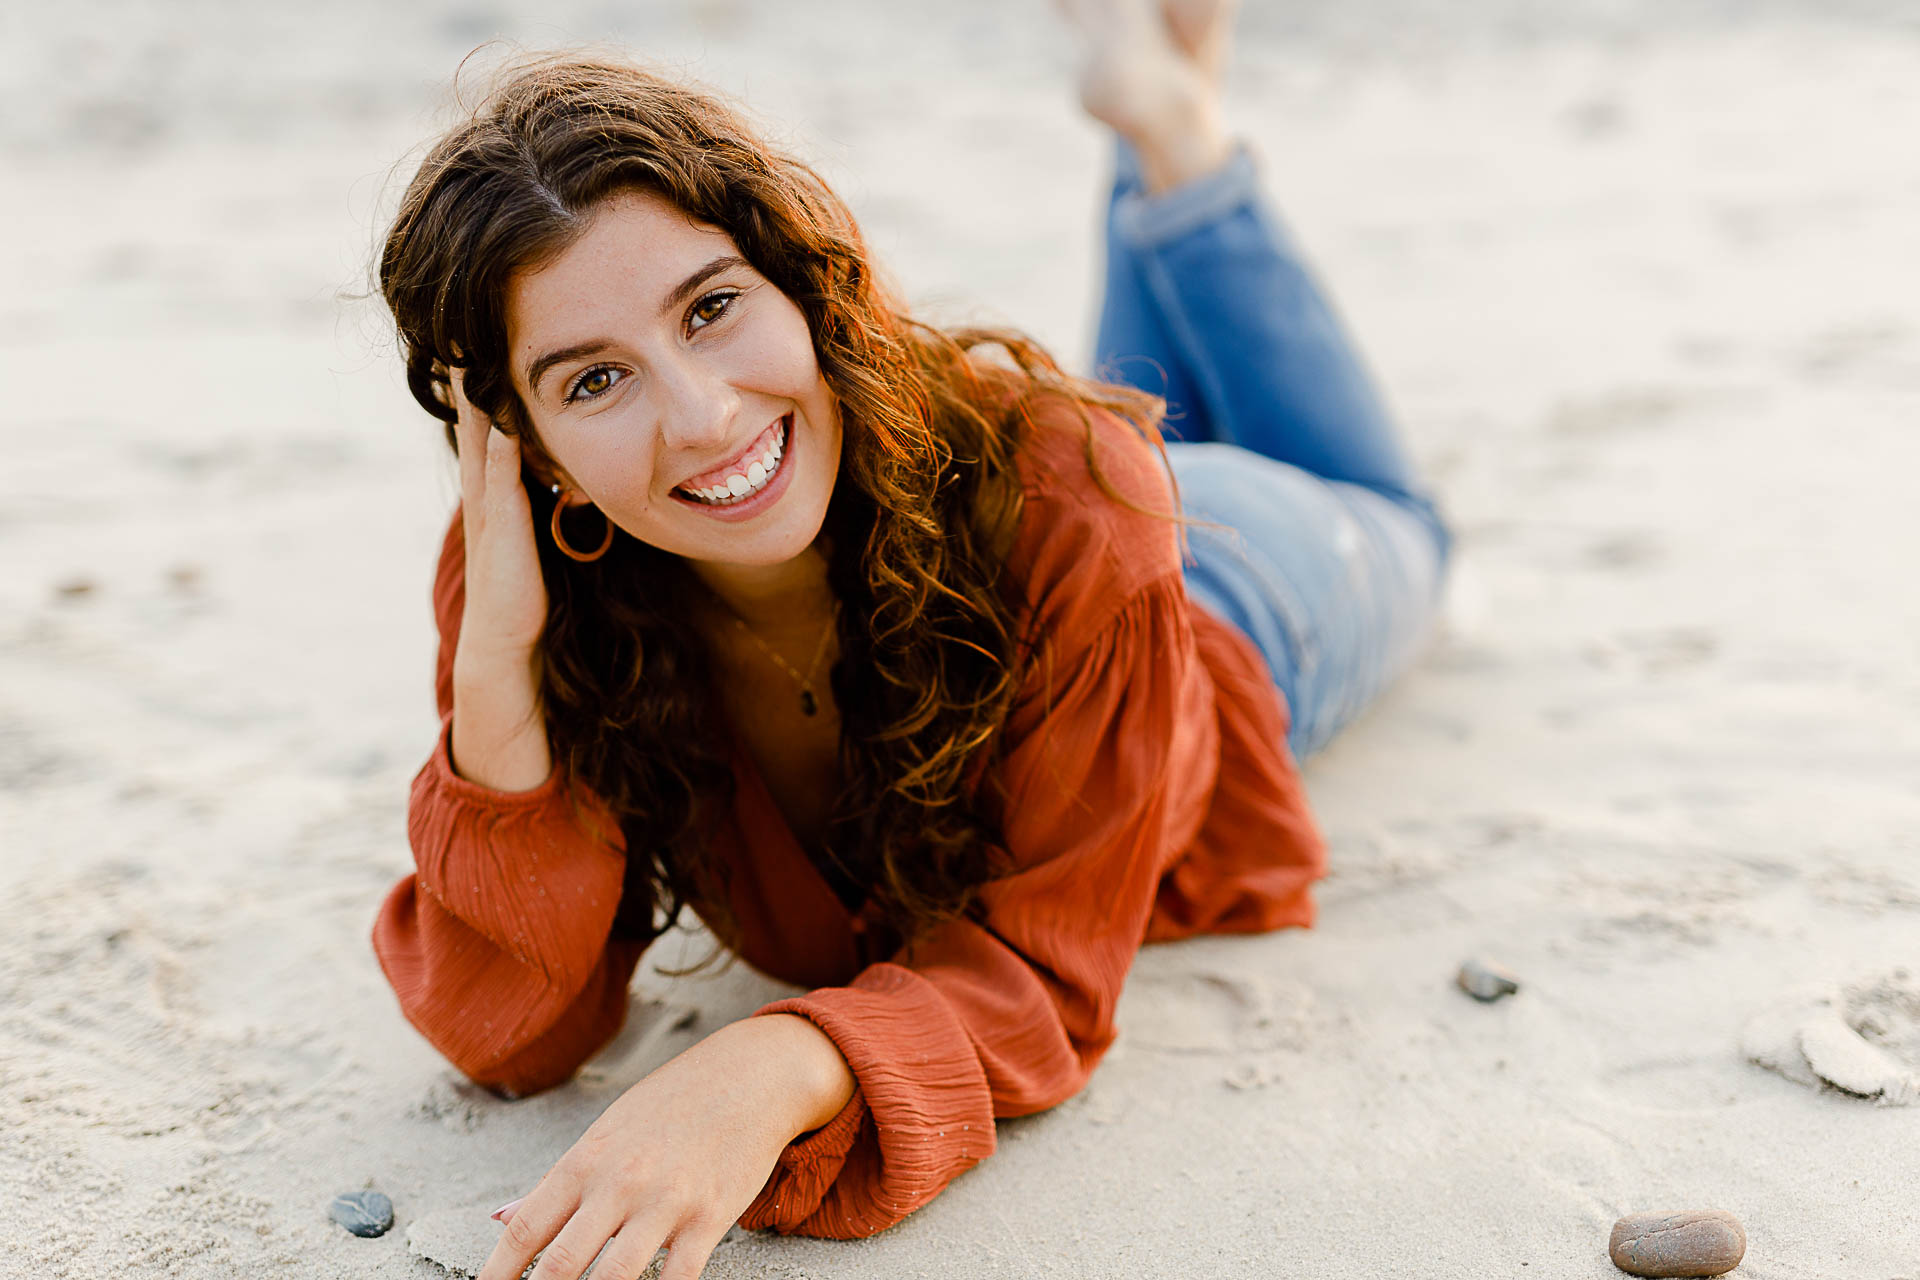 Photo by Scituate Senior Portrait Photographer Christina Runnals | High school senior girl laying on a Scituate beach